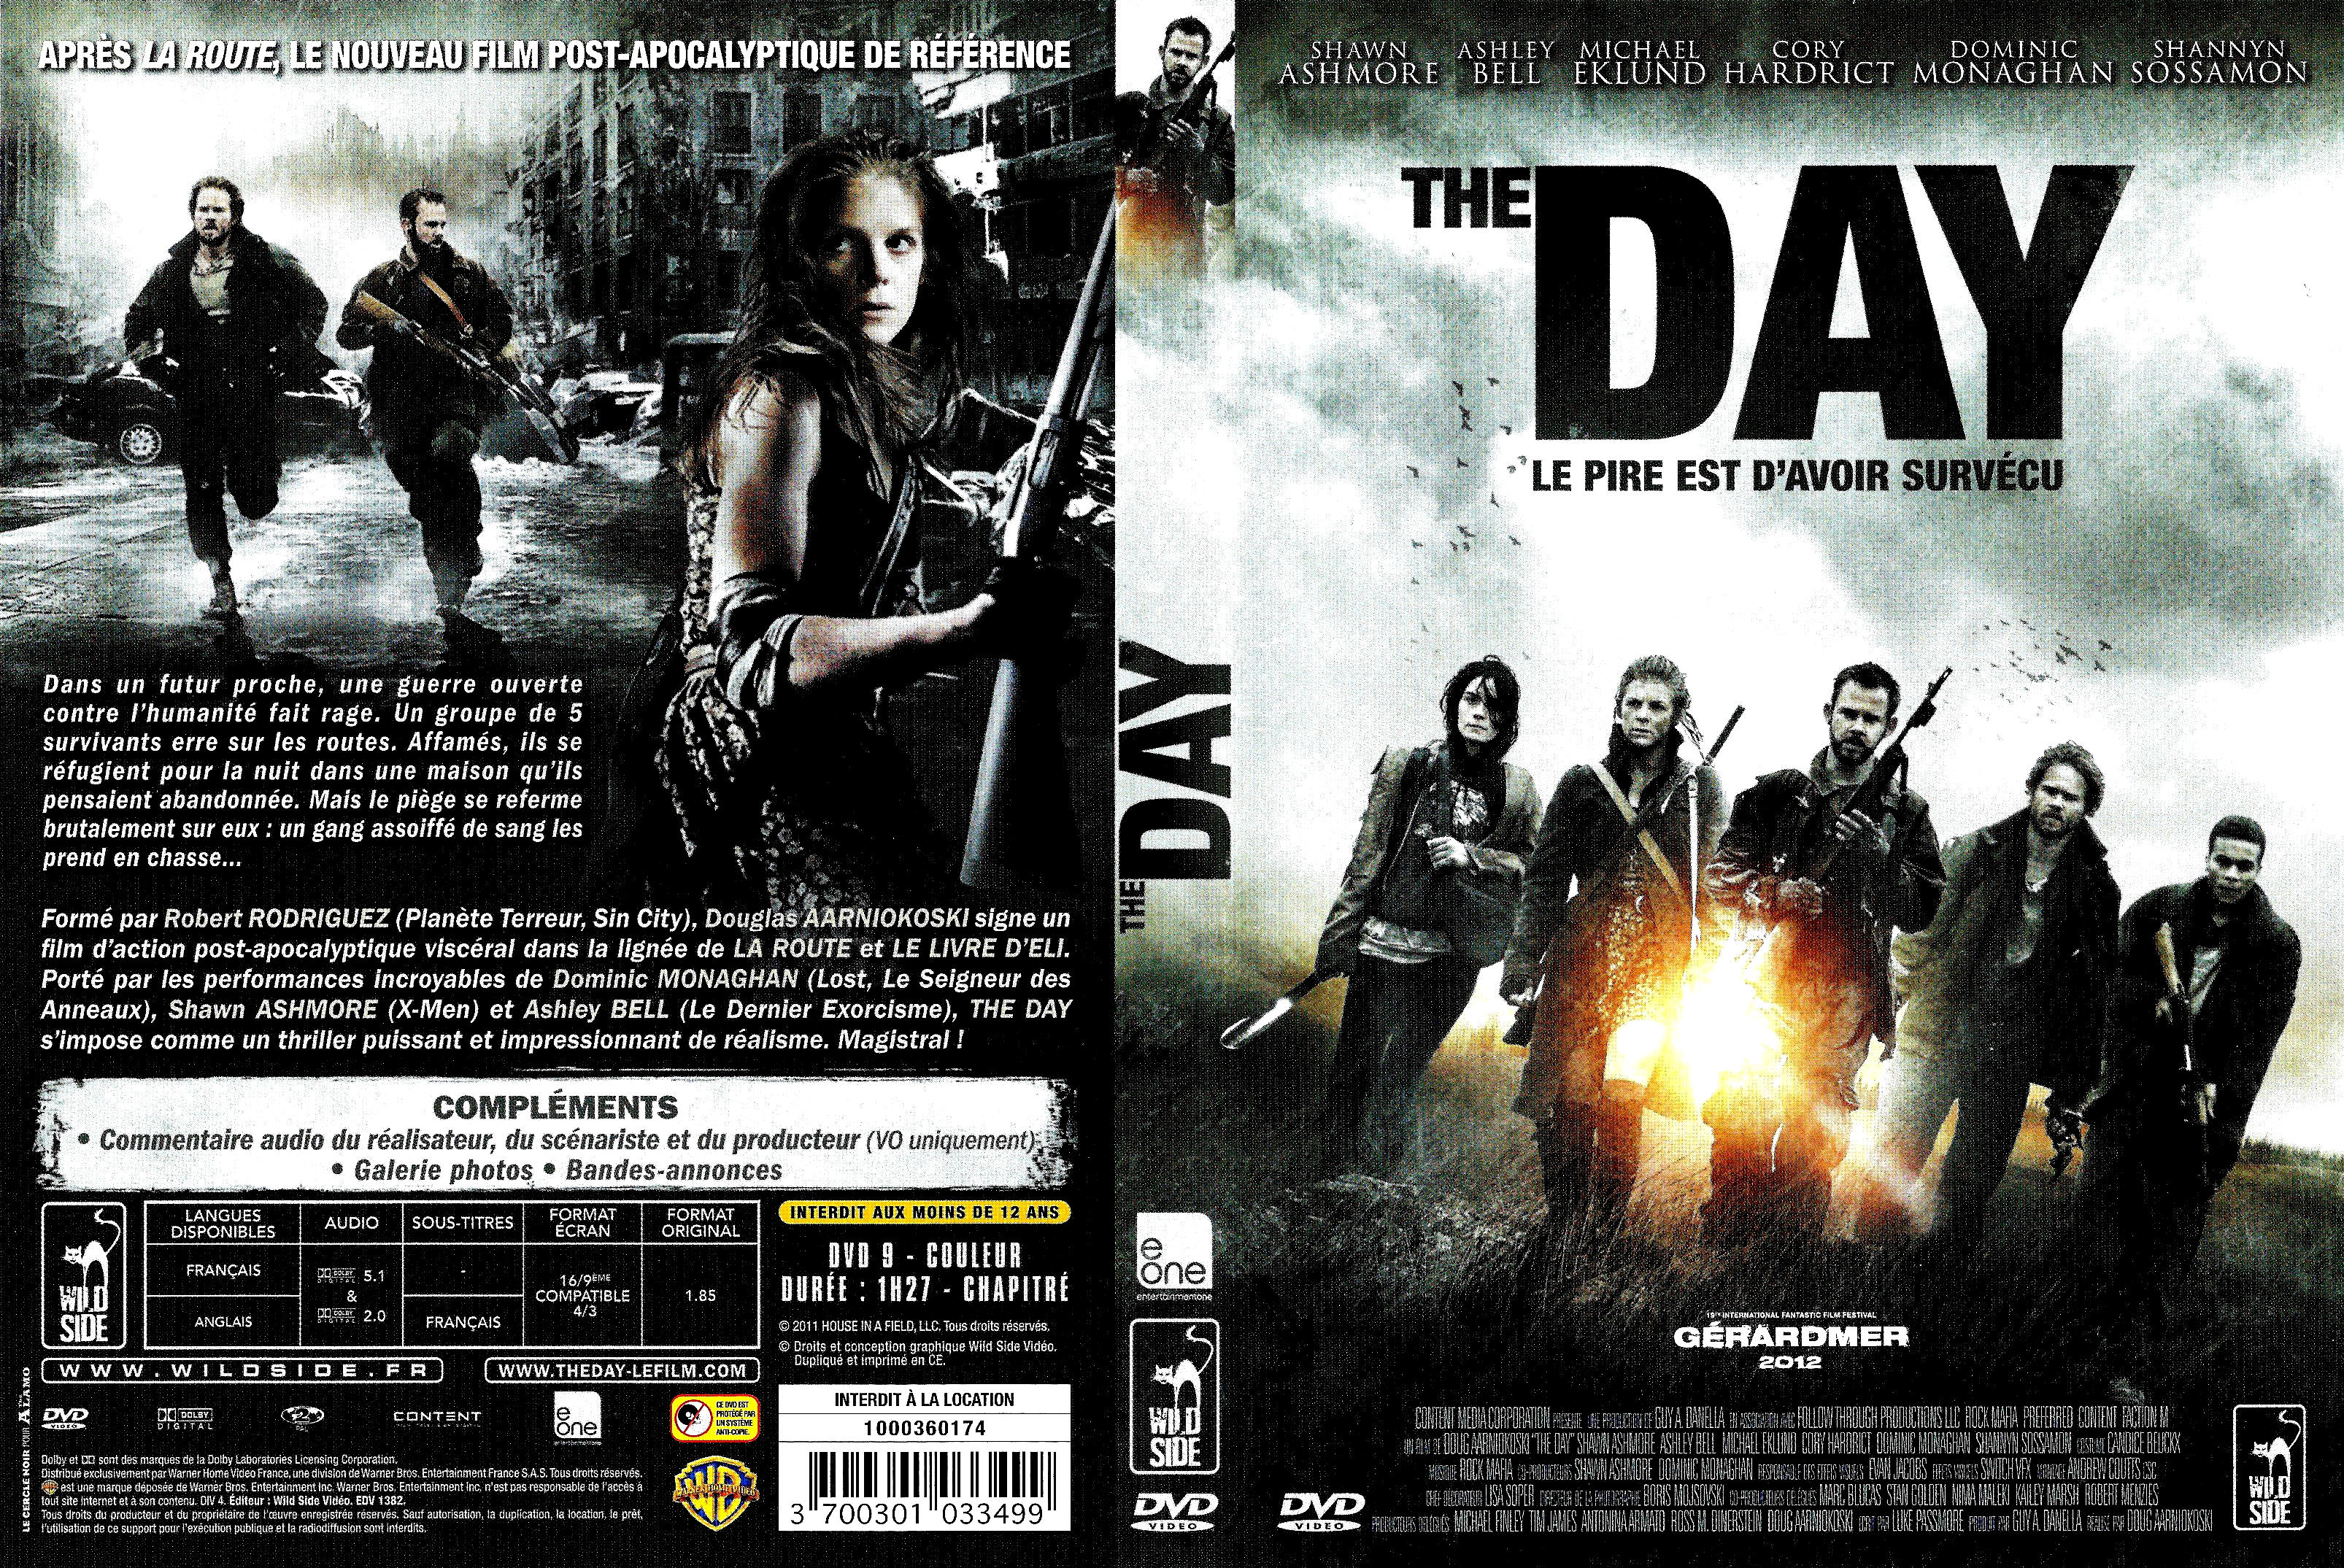 Jaquette DVD The Day